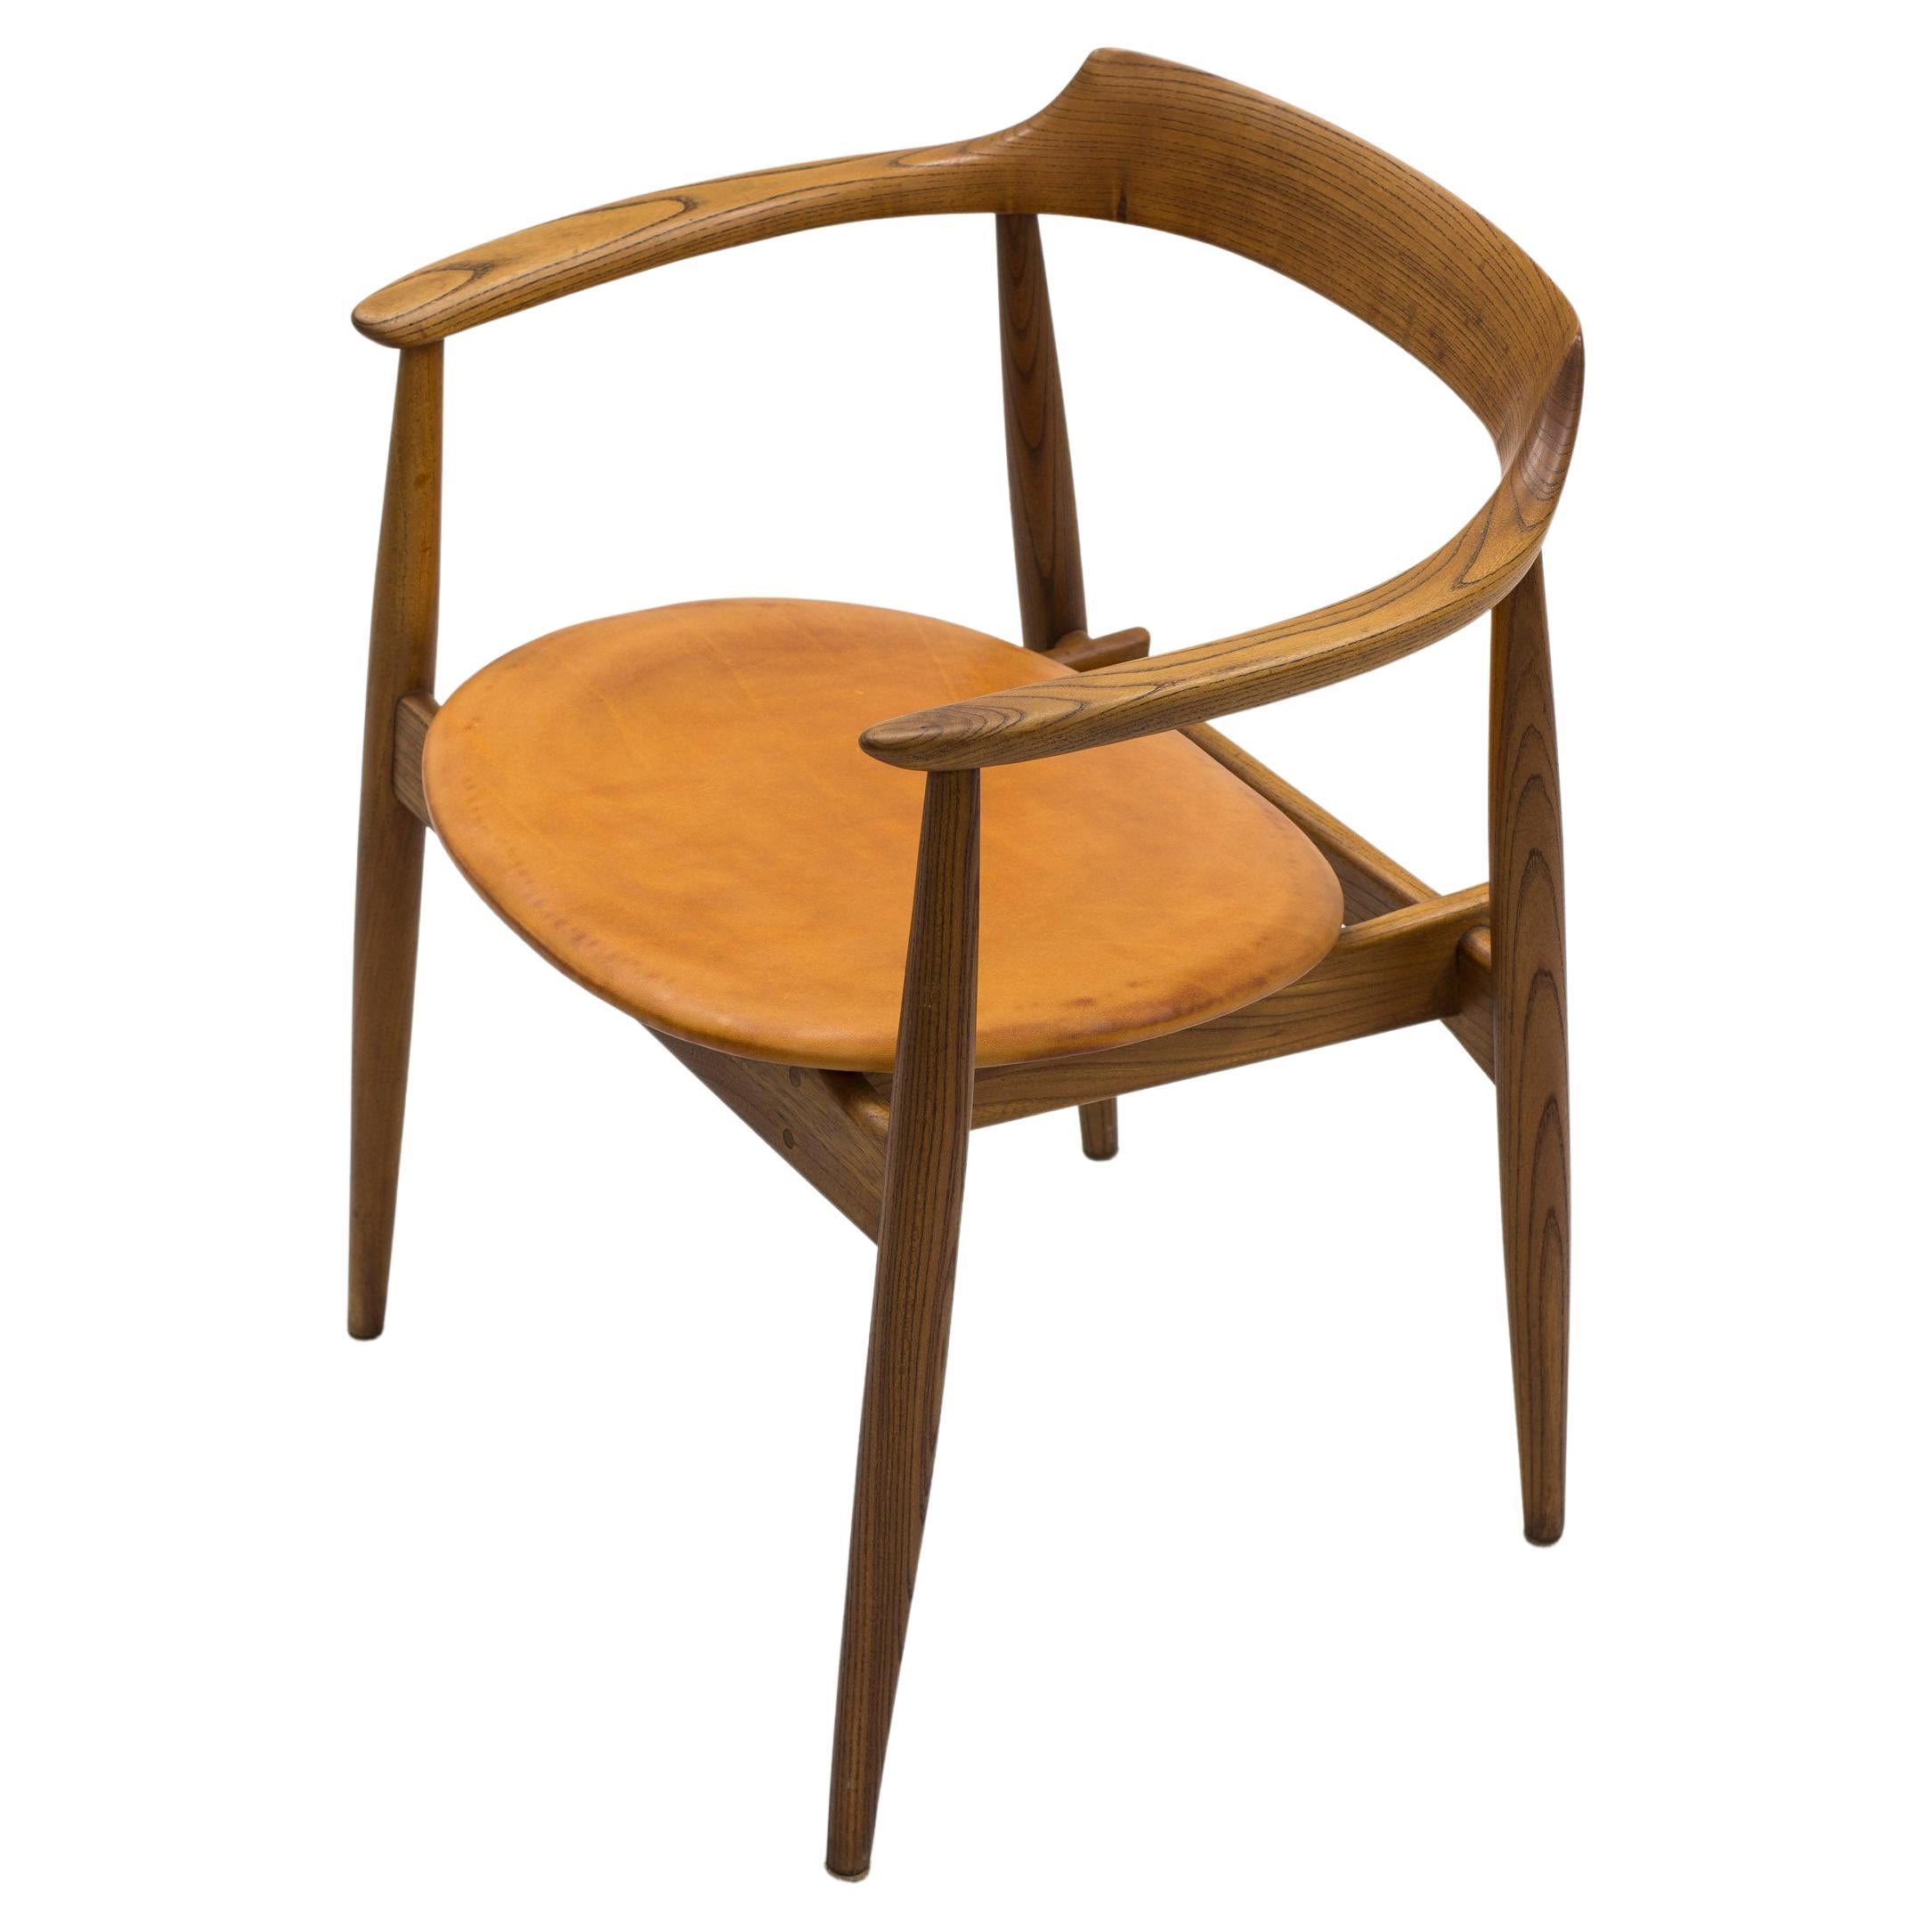 Arm chair in elm and leather with exquisite patina by Arne Wahl Iversen, 1960s For Sale